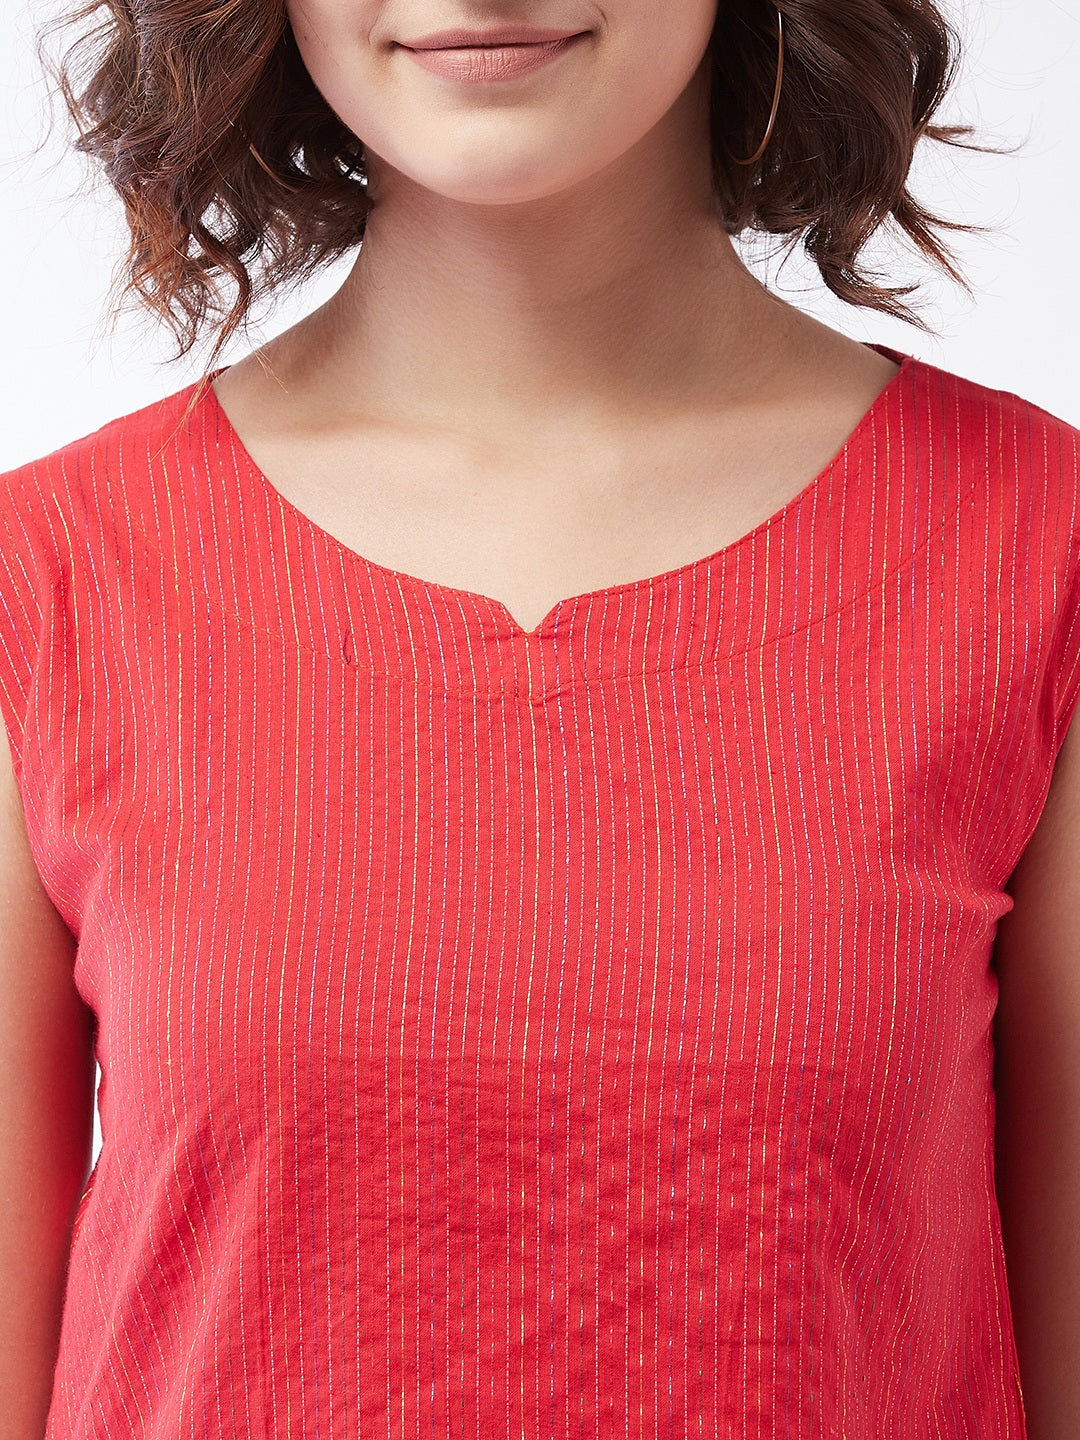 Red Kantha Sleeveless Top For Teens